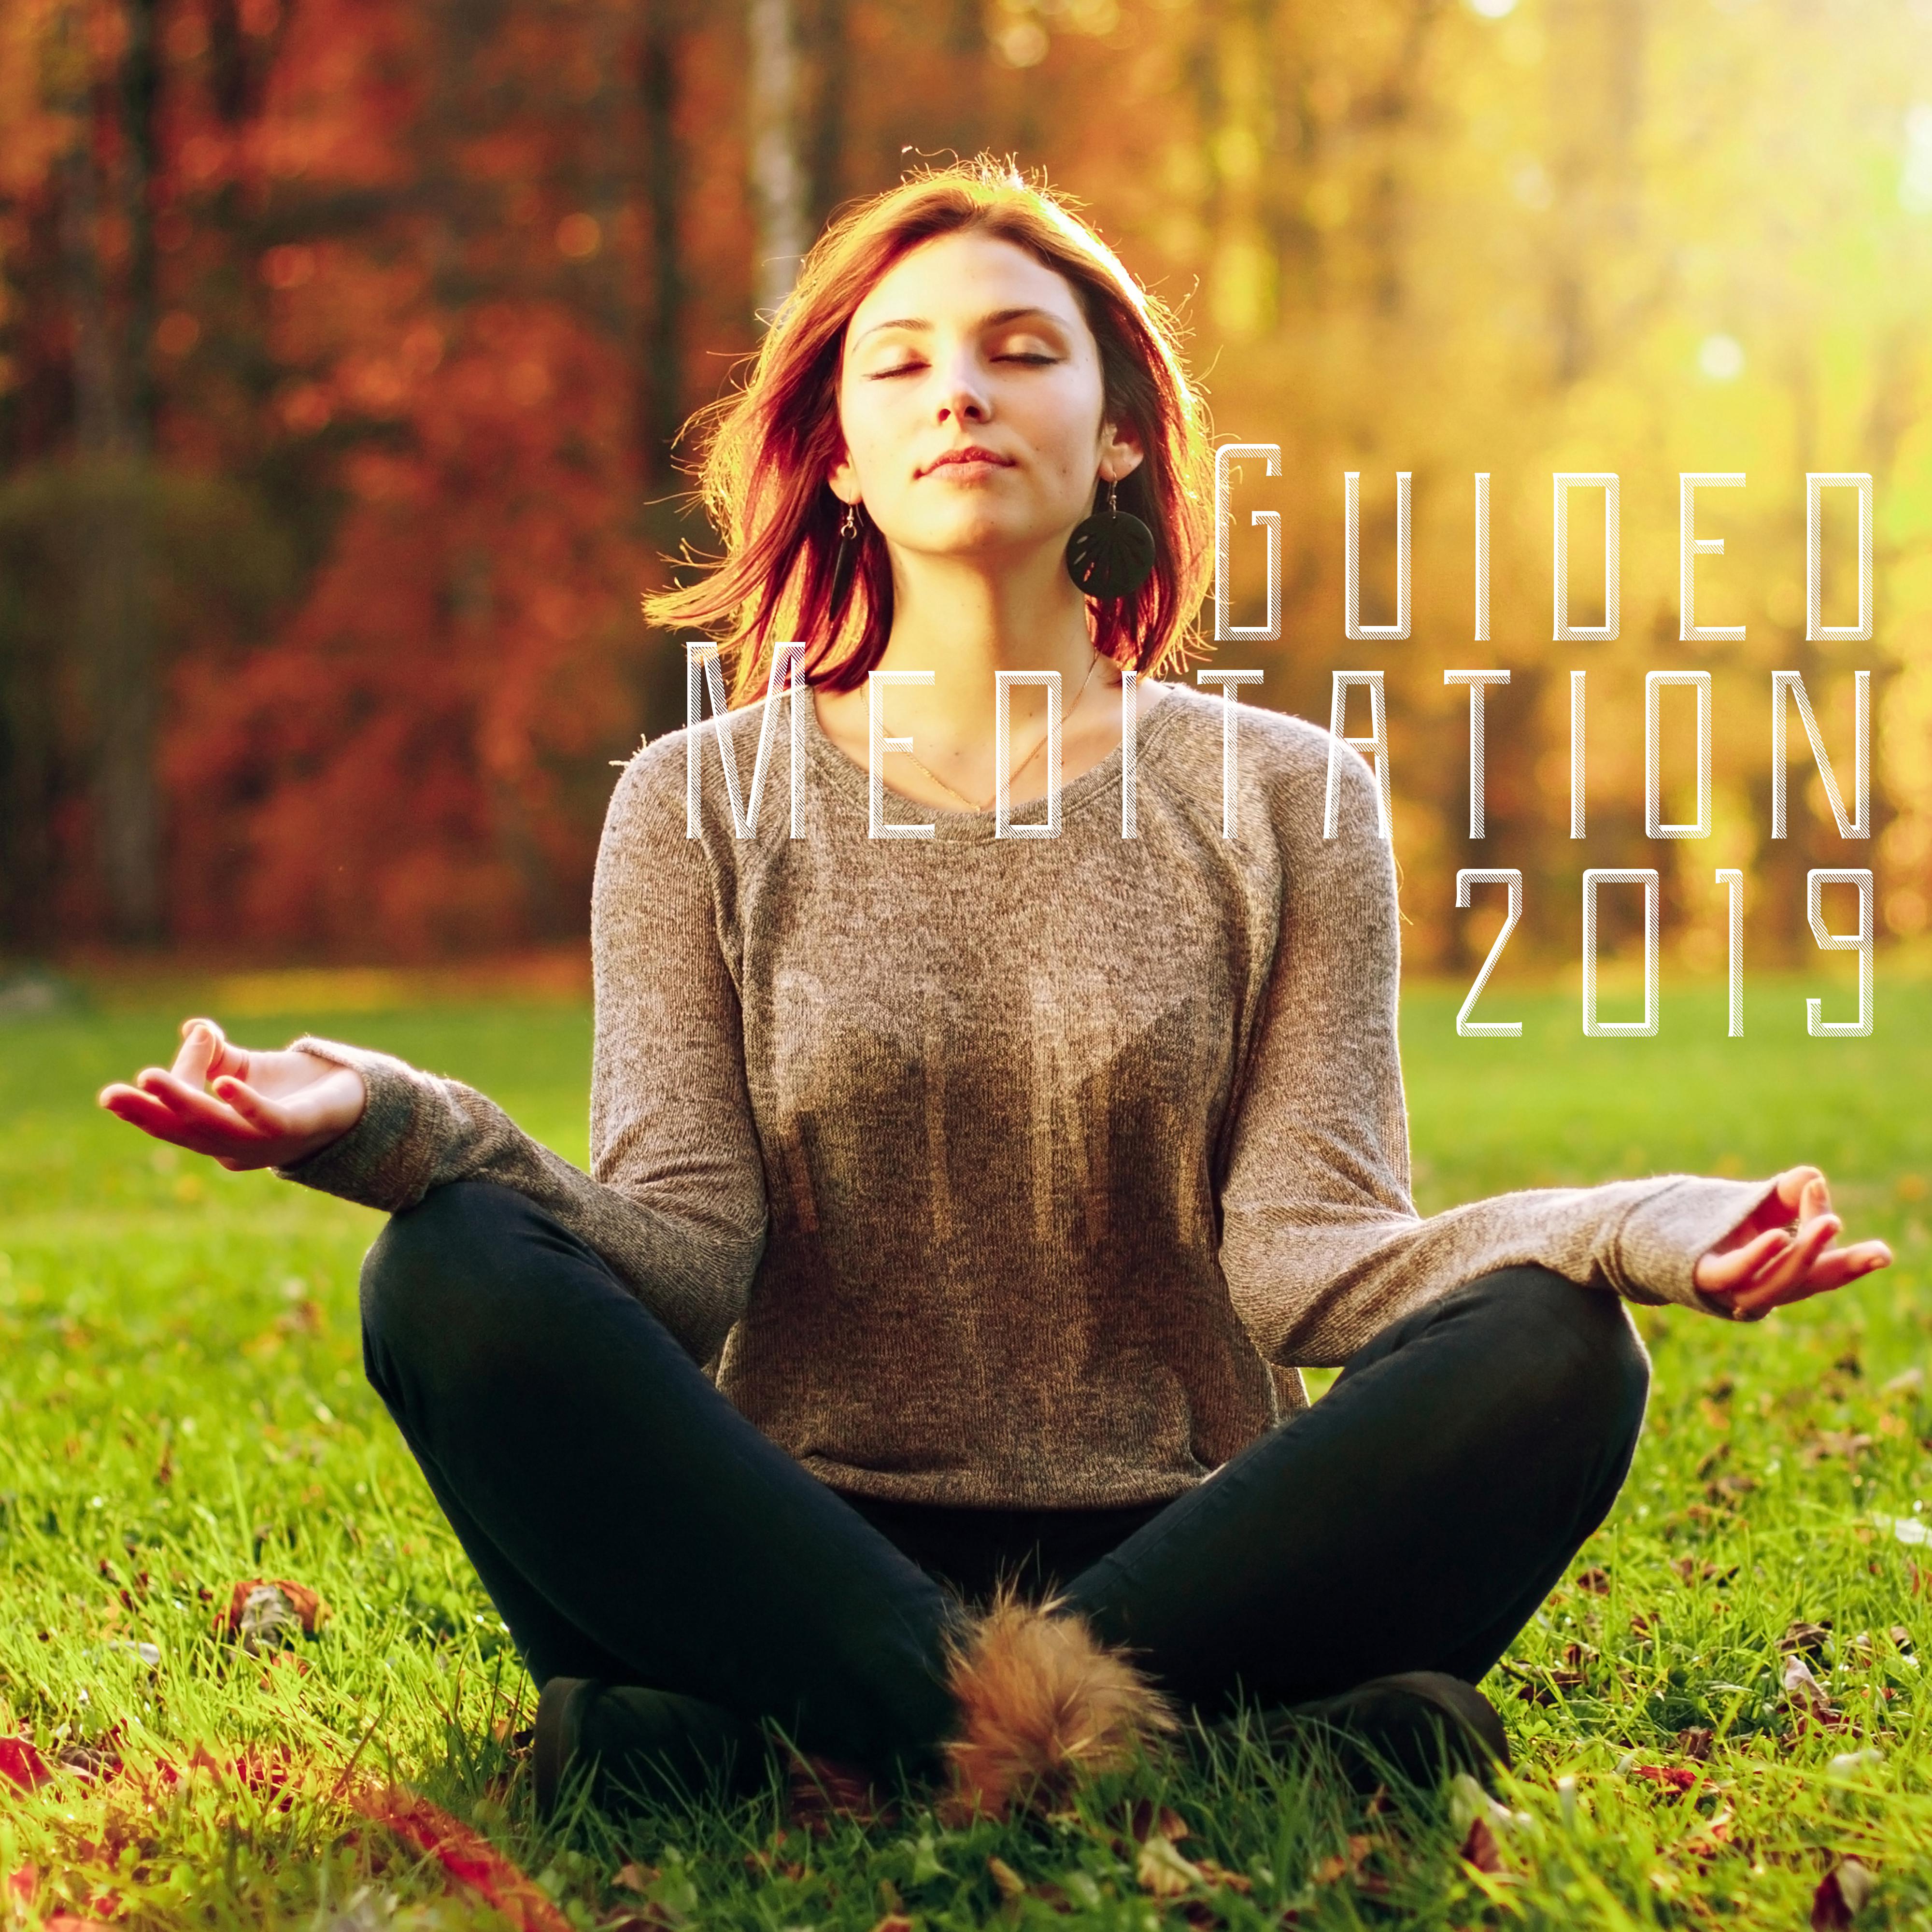 Guided Meditation 2019: New Age Best Music Selection for Deep Yoga & Relaxation Experience, Mindfulness Journey Guide, Third Eye Opening, Chakras Healing